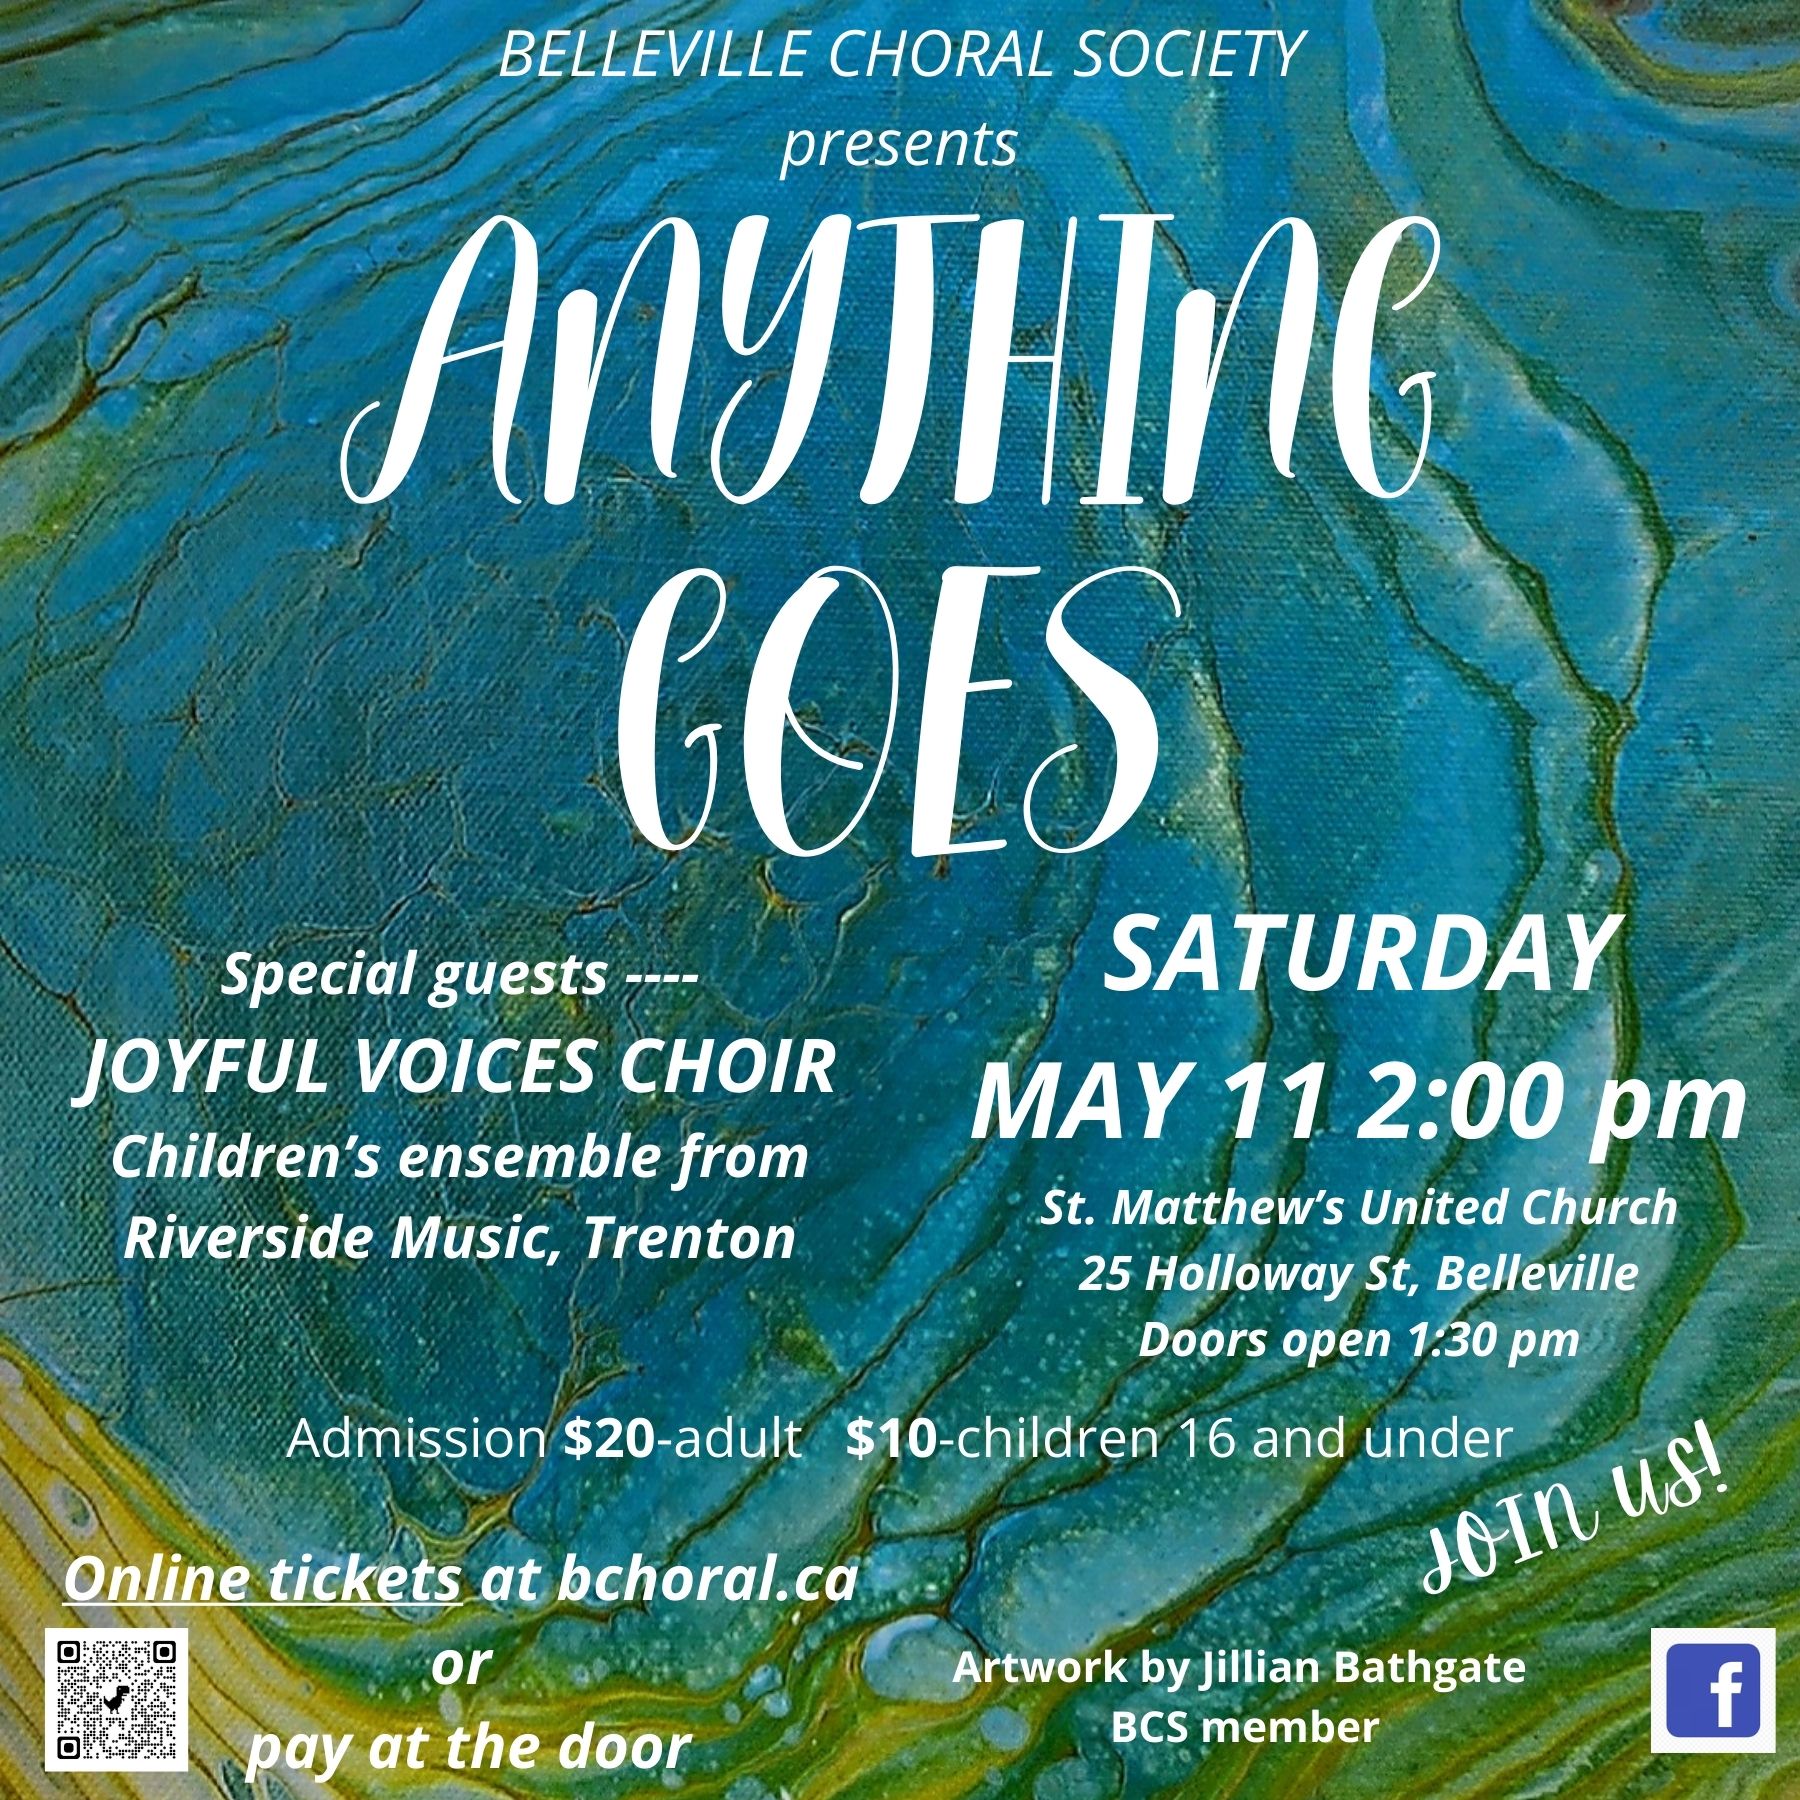 Poster with title "Anything Goes" has blue textured background and event details